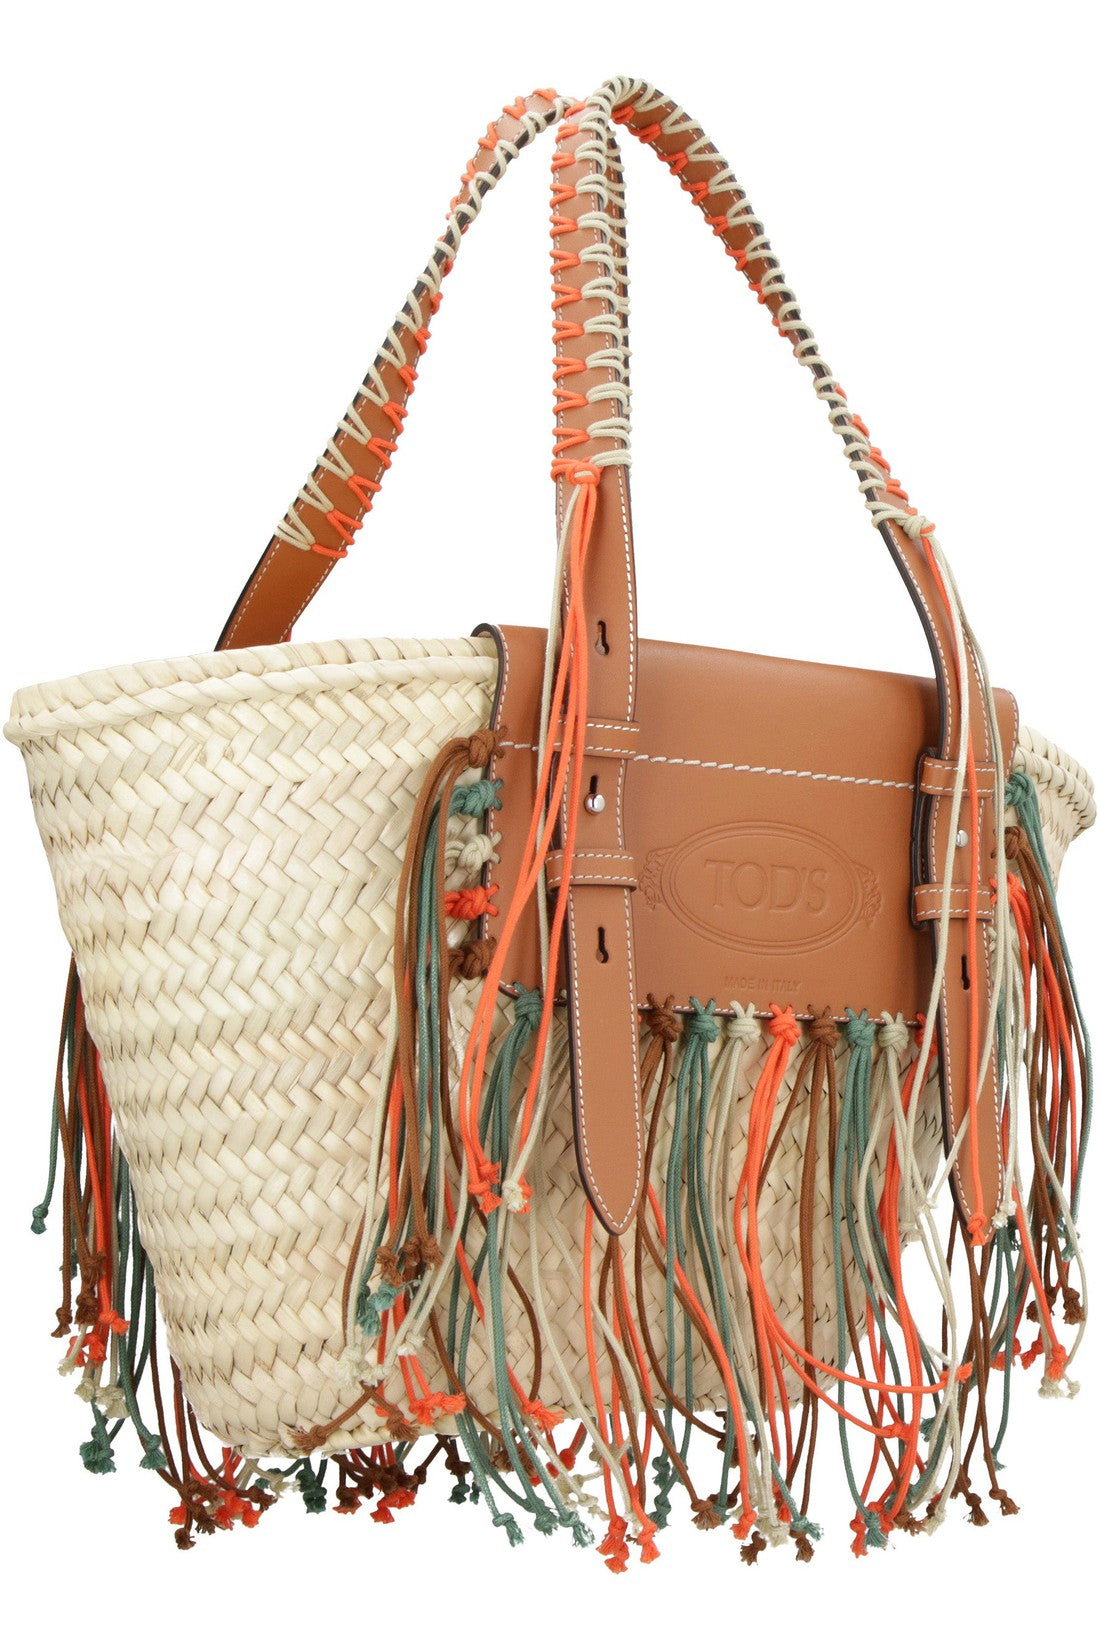 Tod's-OUTLET-SALE-Woven straw tote-ARCHIVIST